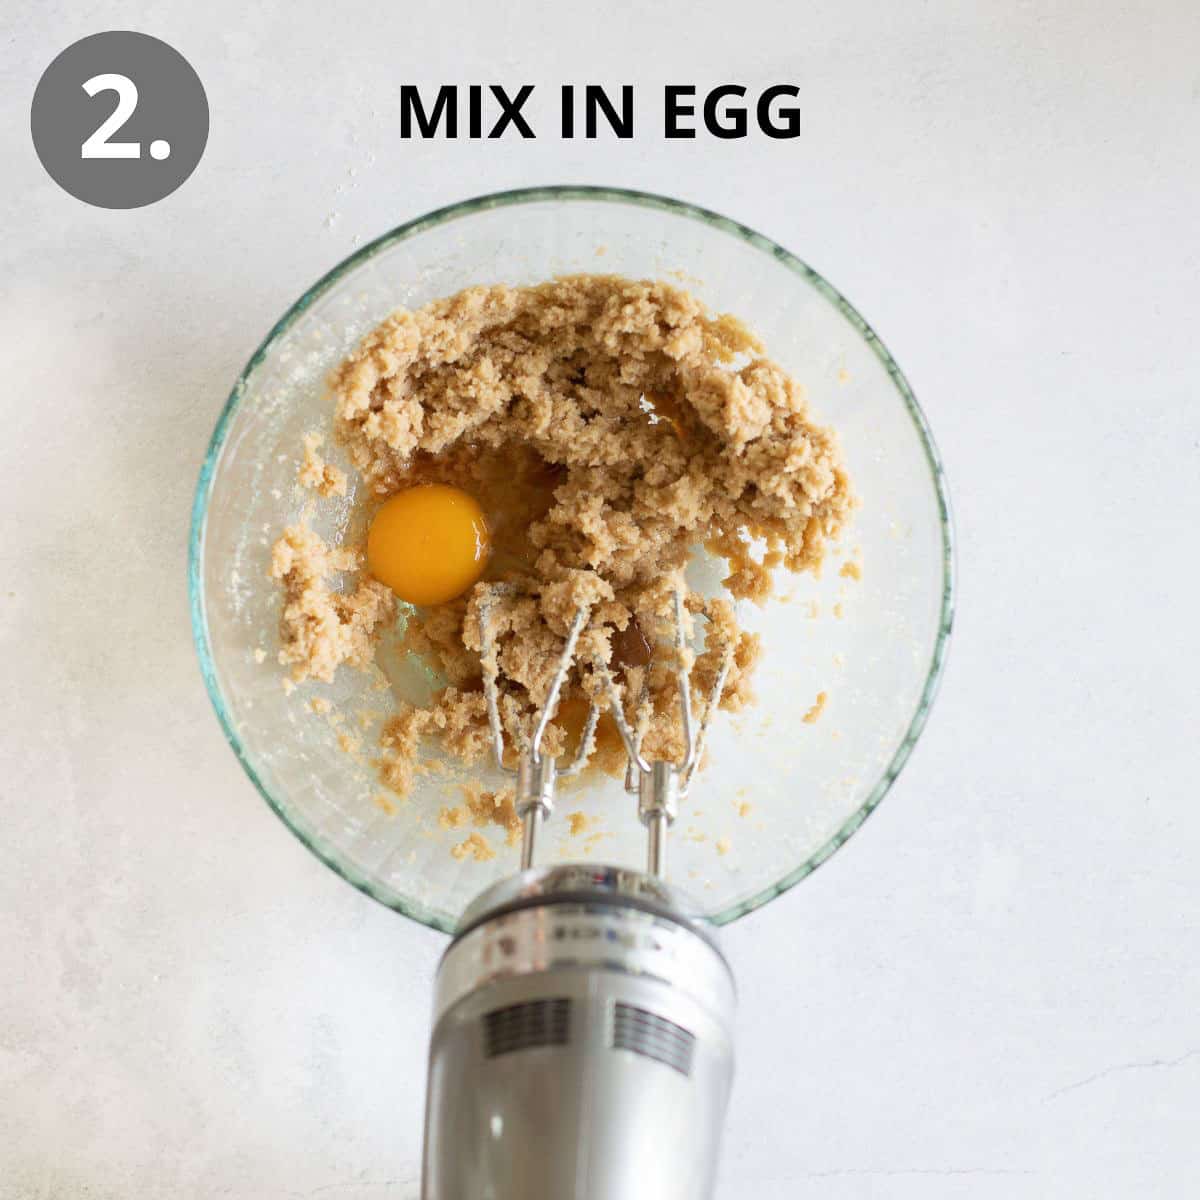 Egg, butter, and sugar being mixed in a glass mixing bowl